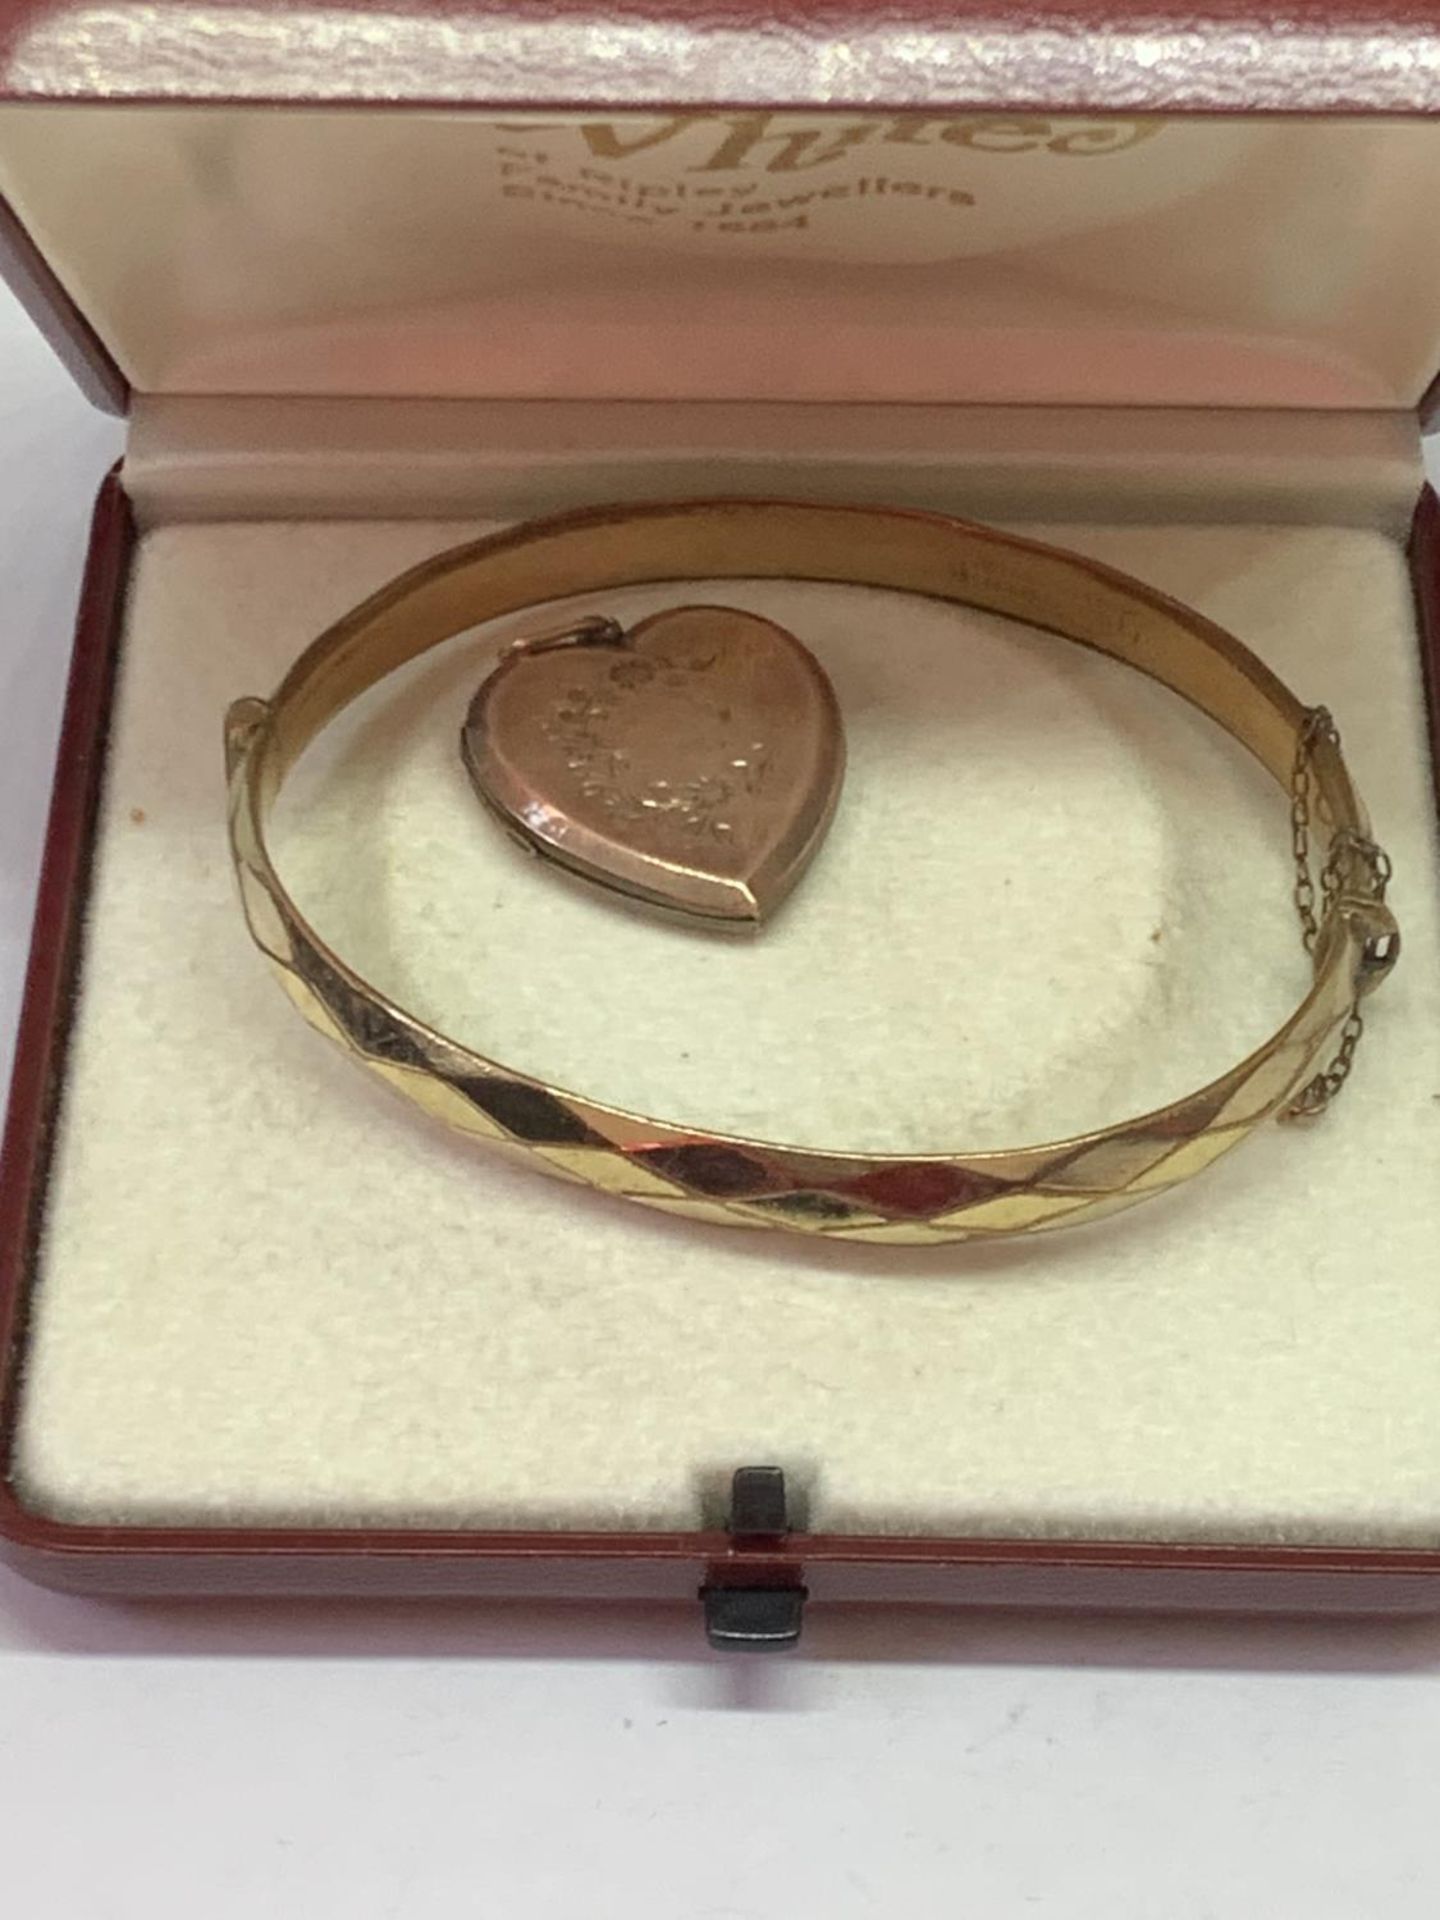 TWO 9 CARAT GOLD PLATED ITEMS - A BANGLE AND A HEART SHAPED LOCKET